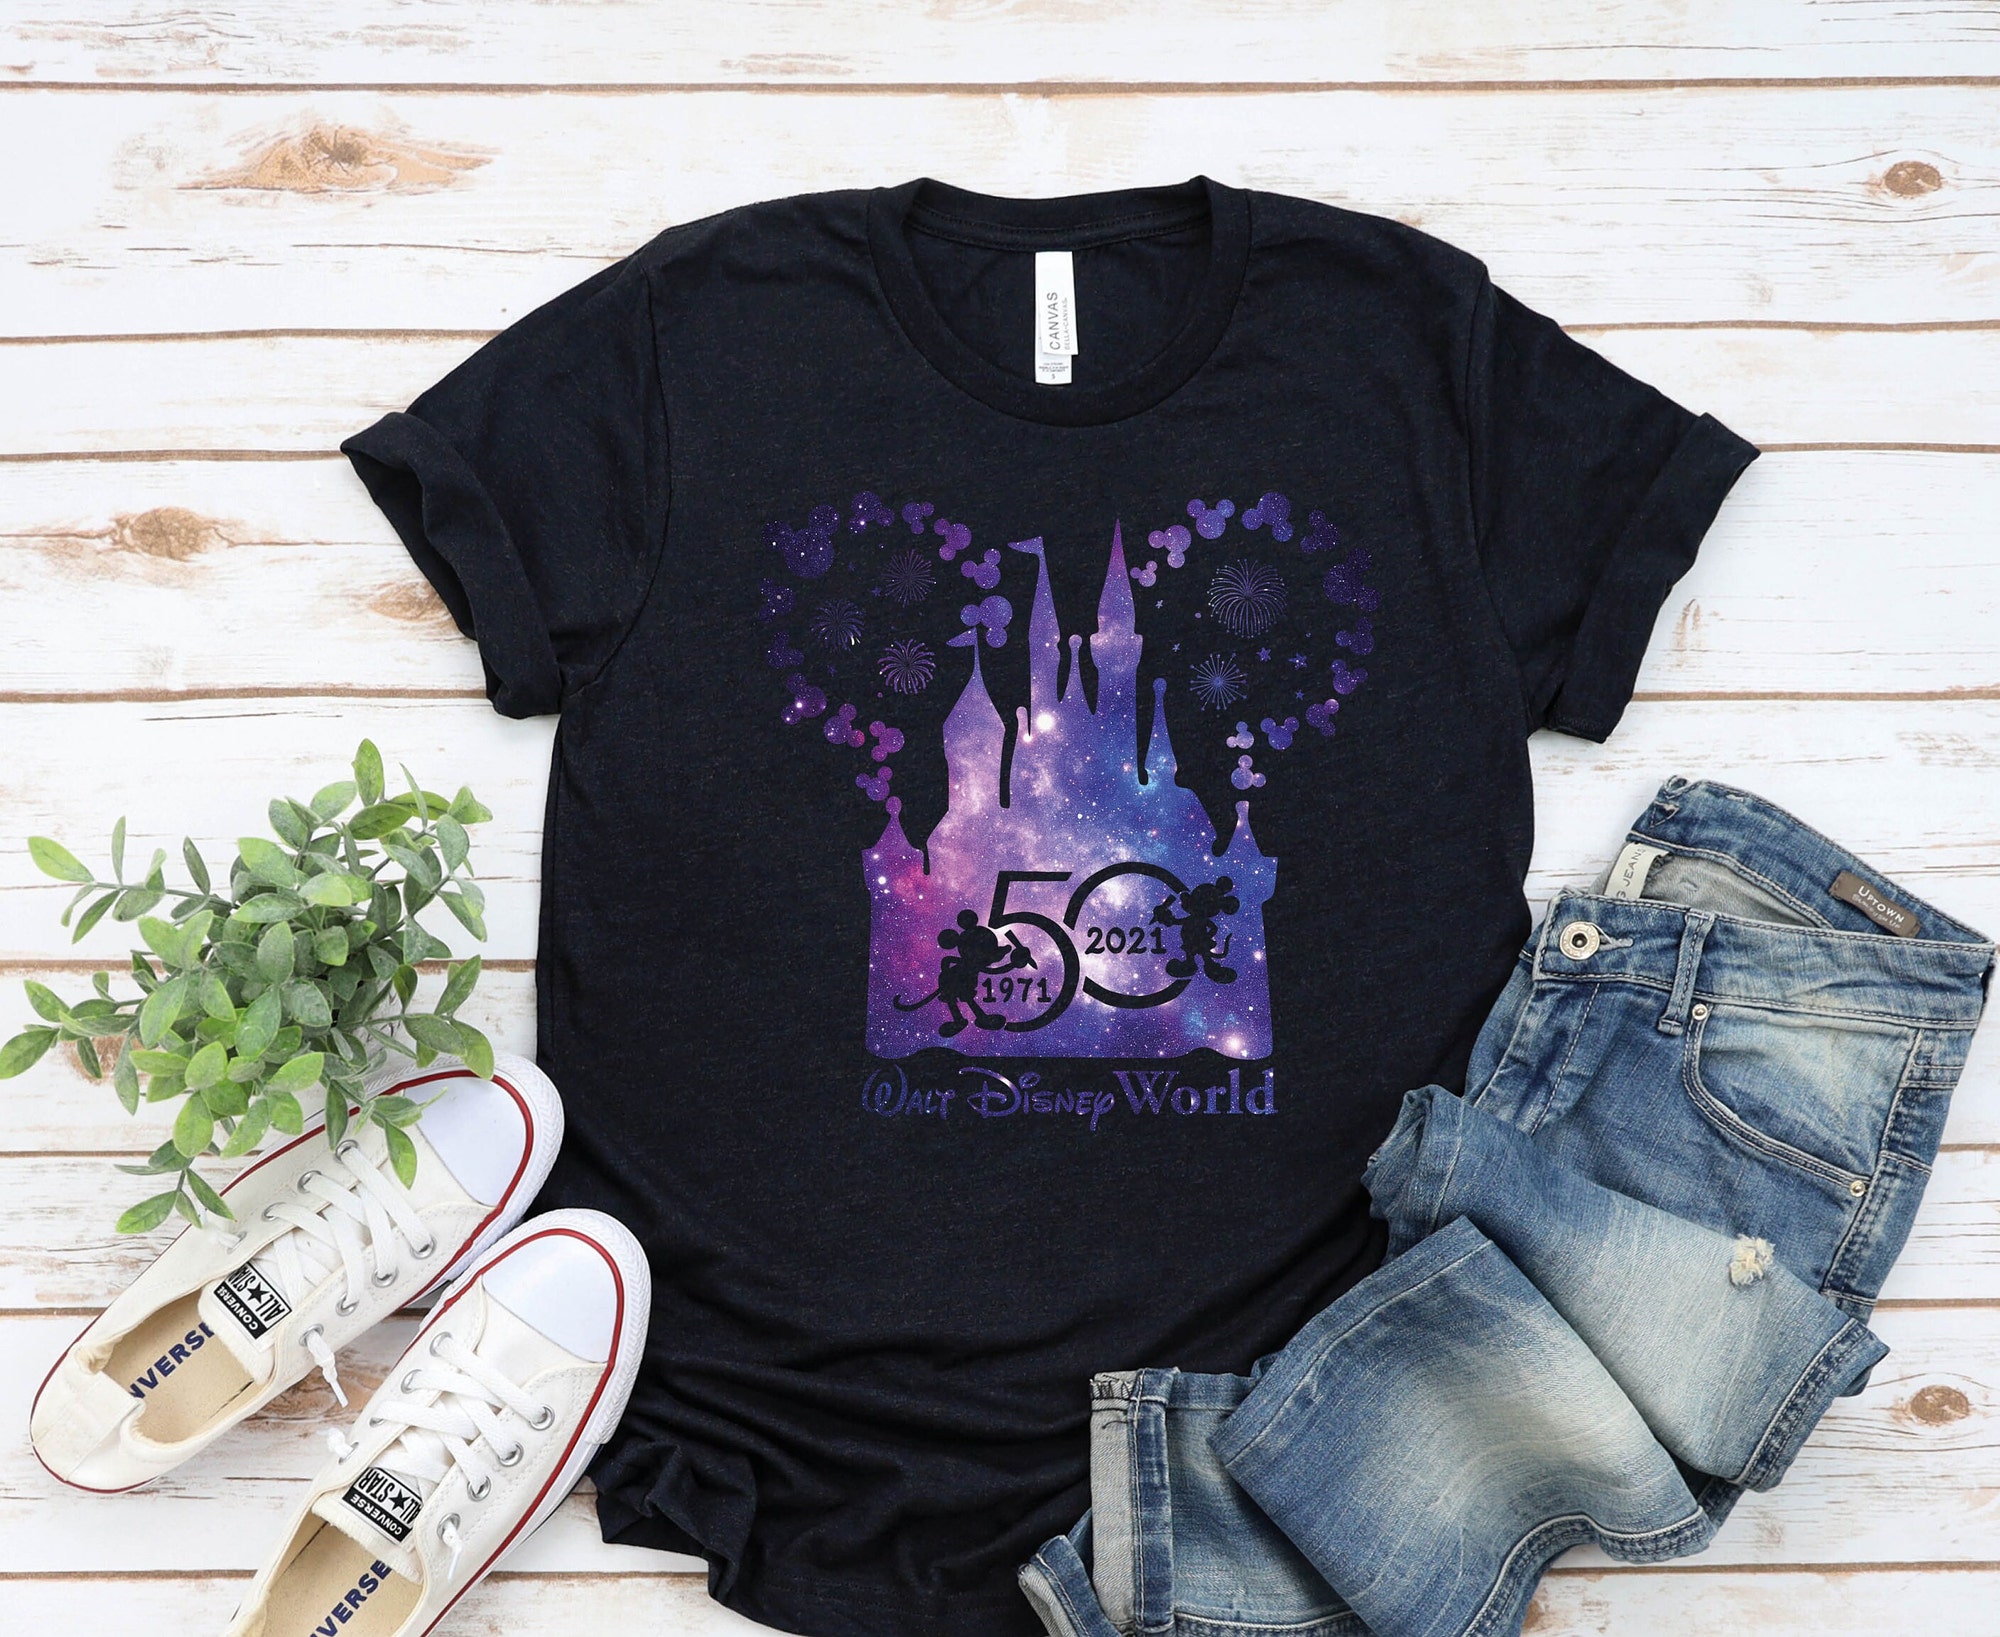 Discover Disney 50th Anniversary Celebrate Shirt, Disney World Family Matching Vacation Tee, Customized Disney Castle Trip With Mickey & Minnie Shirt